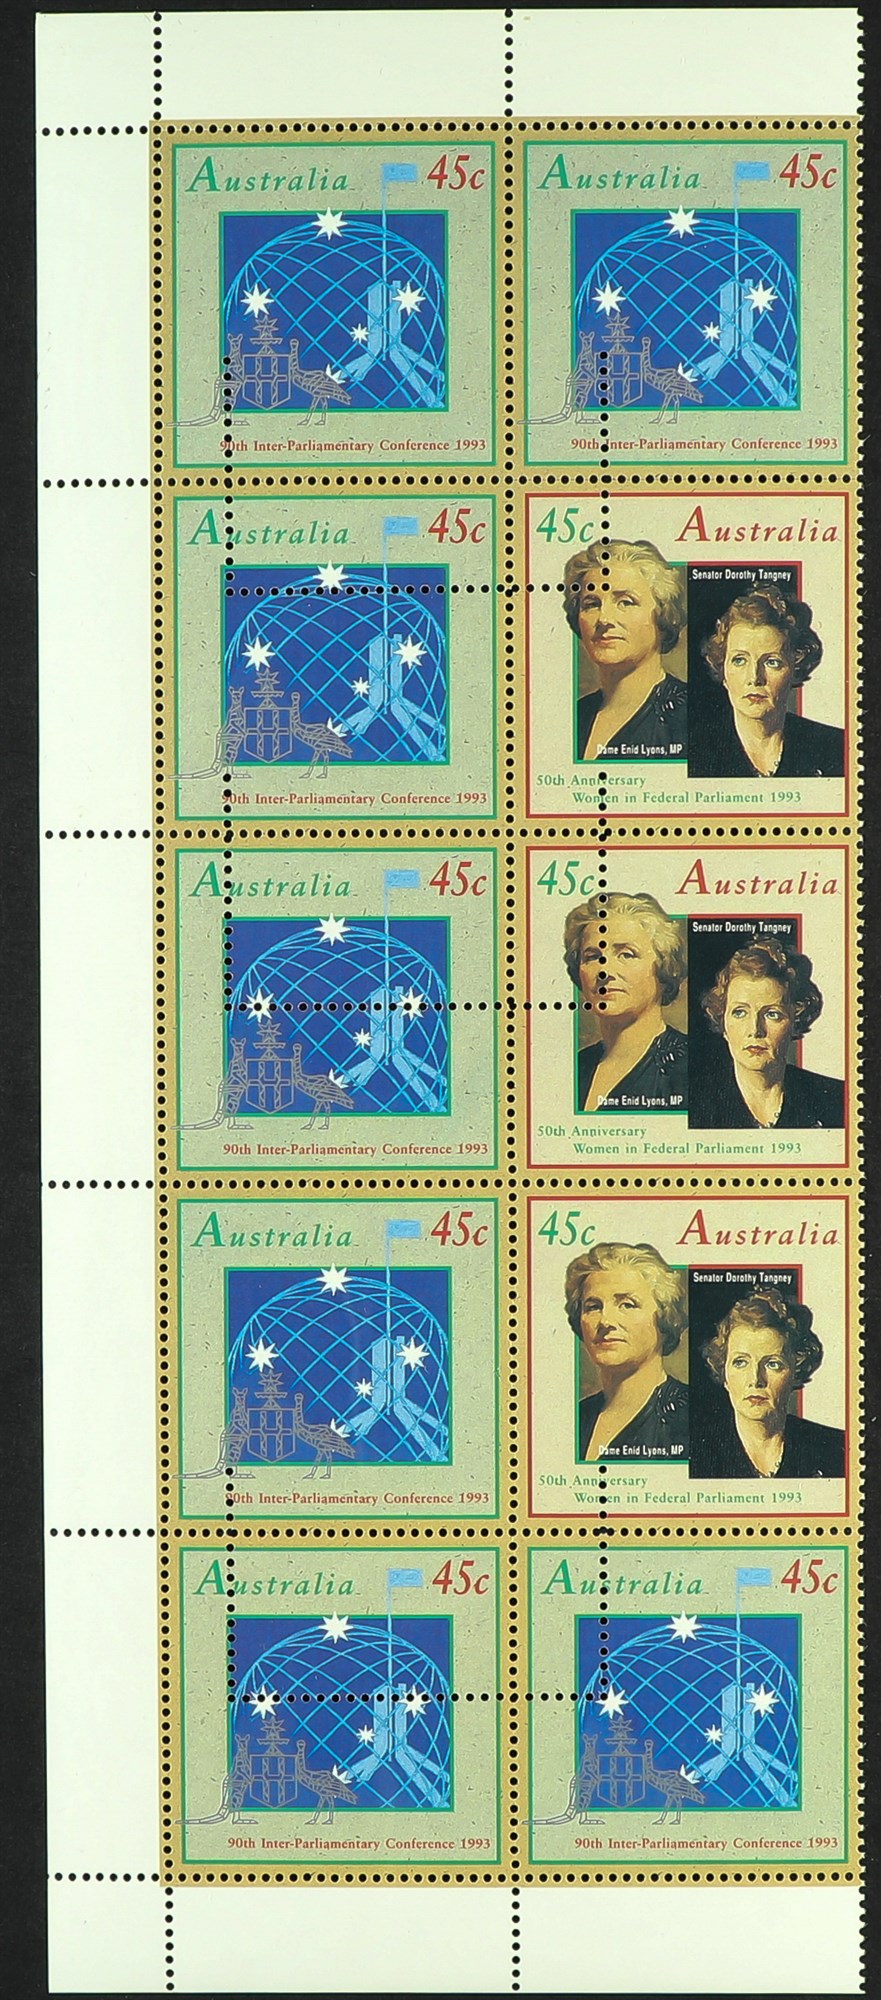 AUSTRALIA 1993 45c Parliament and Women issue (SG 1421/22) block of 10 stamps unissued with printers